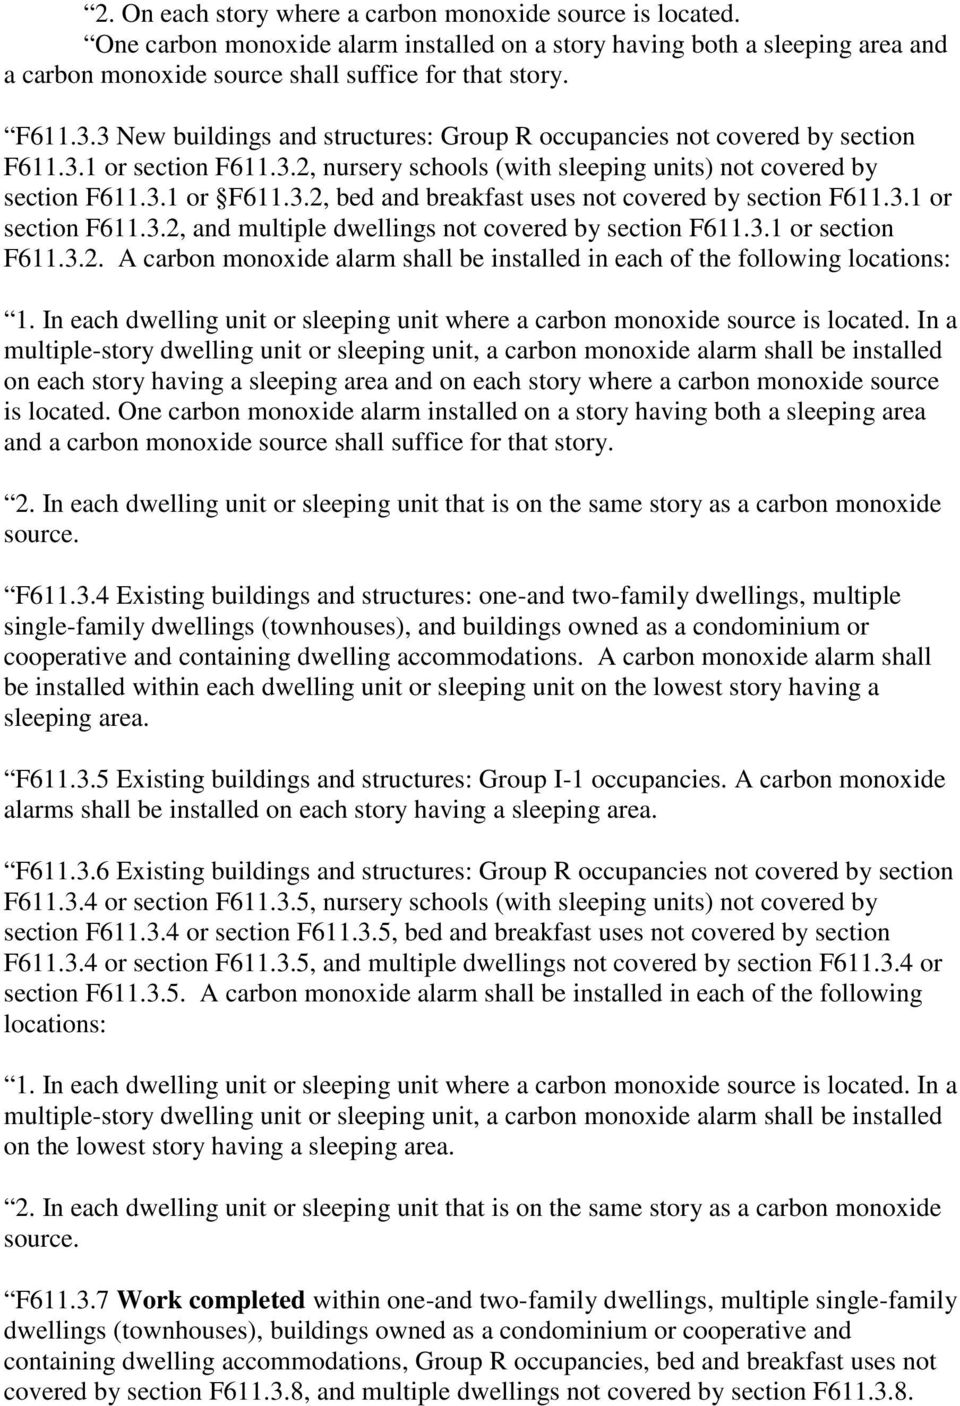 3.1 or section F611.3.2, and multiple dwellings not covered by section F611.3.1 or section F611.3.2. A carbon monoxide alarm shall be installed in each of the following locations: 1.